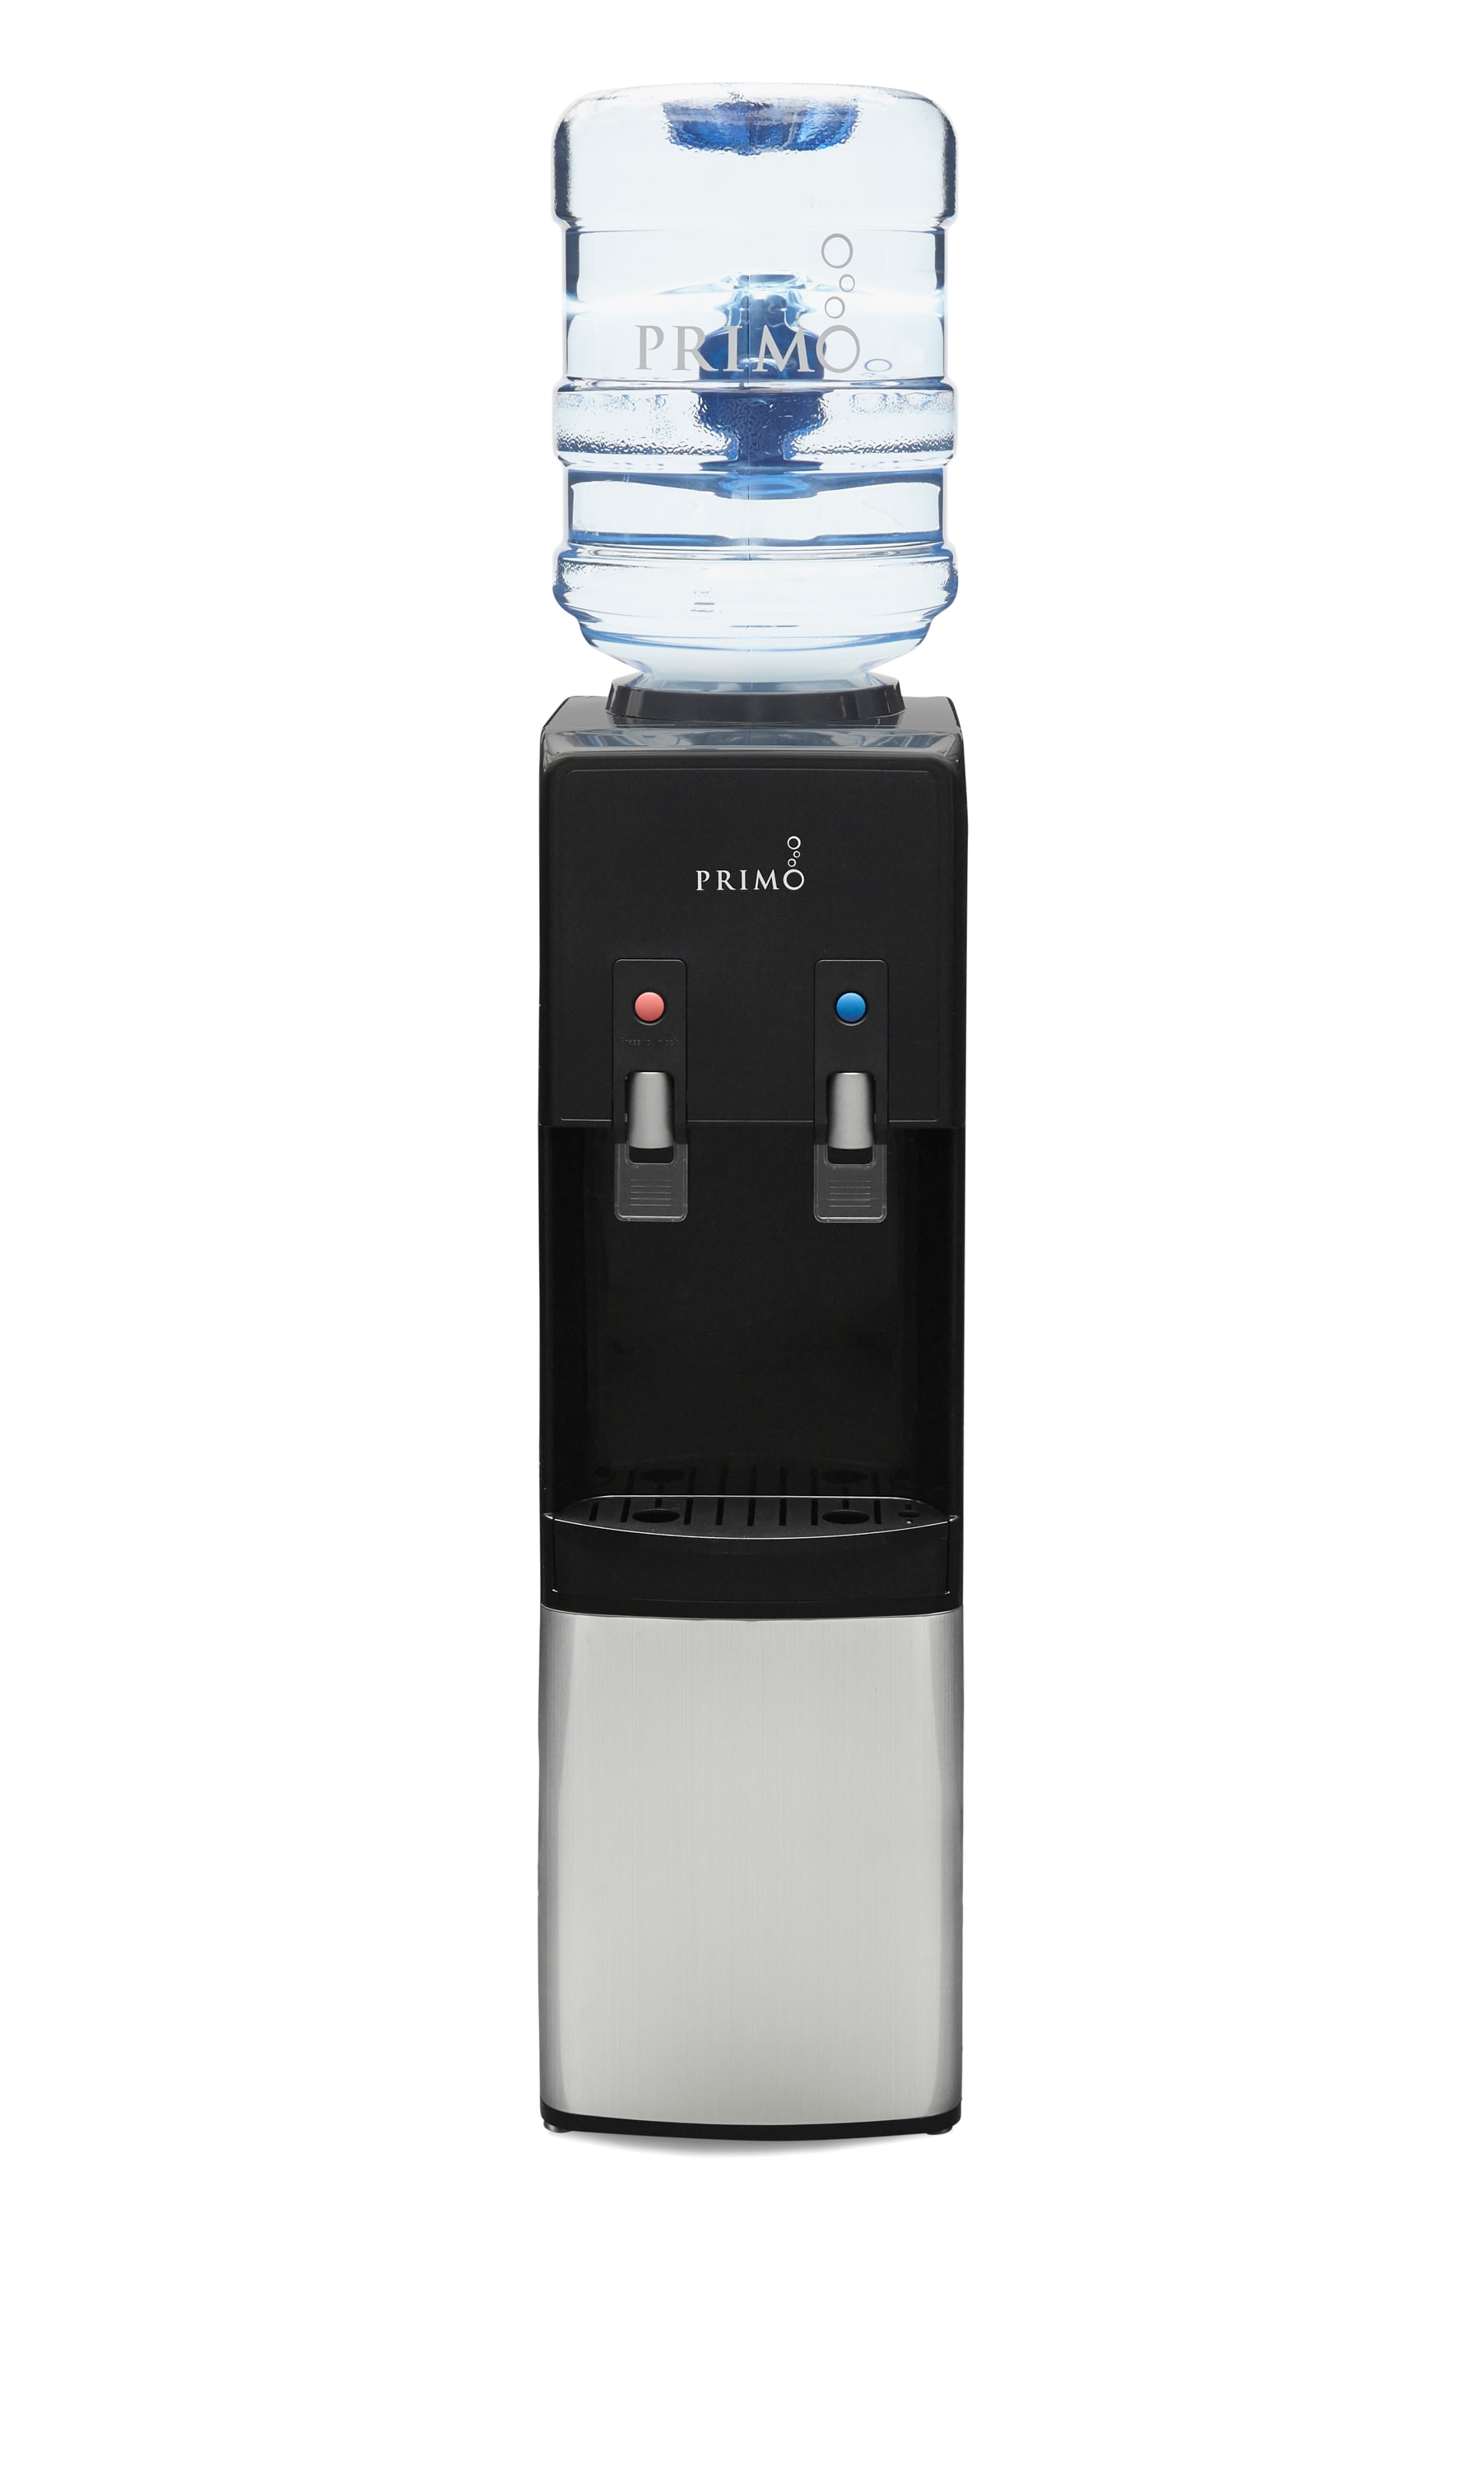 How a Primo Water Dispenser Reduced our Kitchen's Plastic Waste